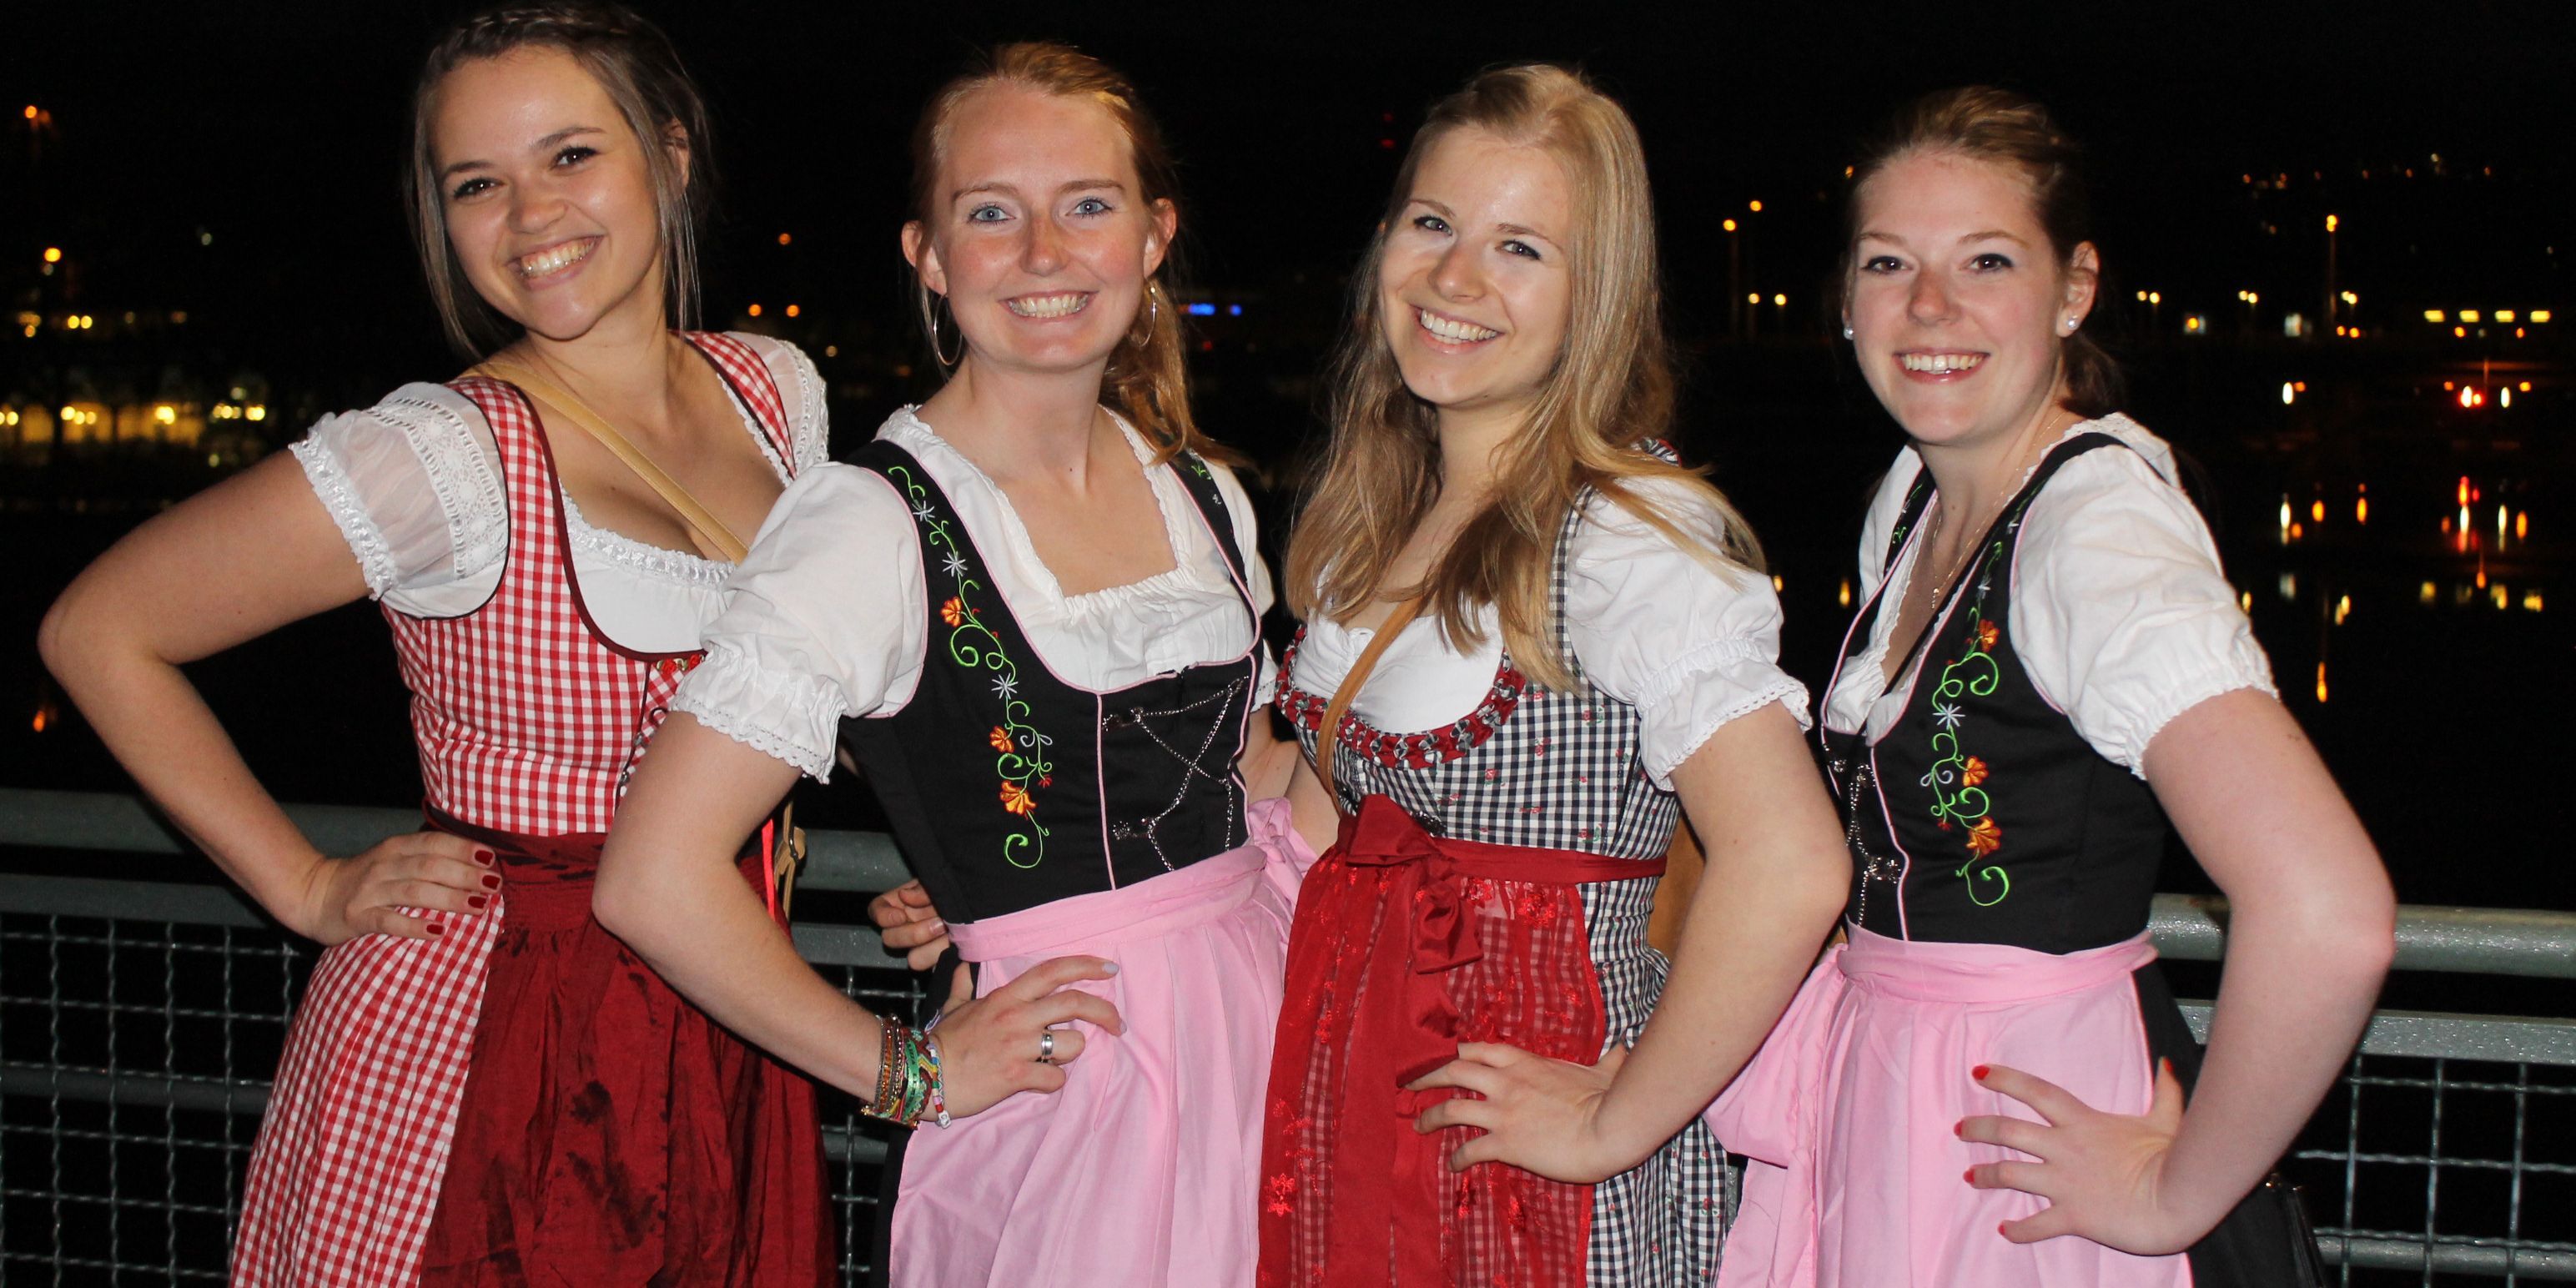 The dirndl is also present at the Wasen, just like at the Villacher Kirchtag! © Mikael Gnospelius 